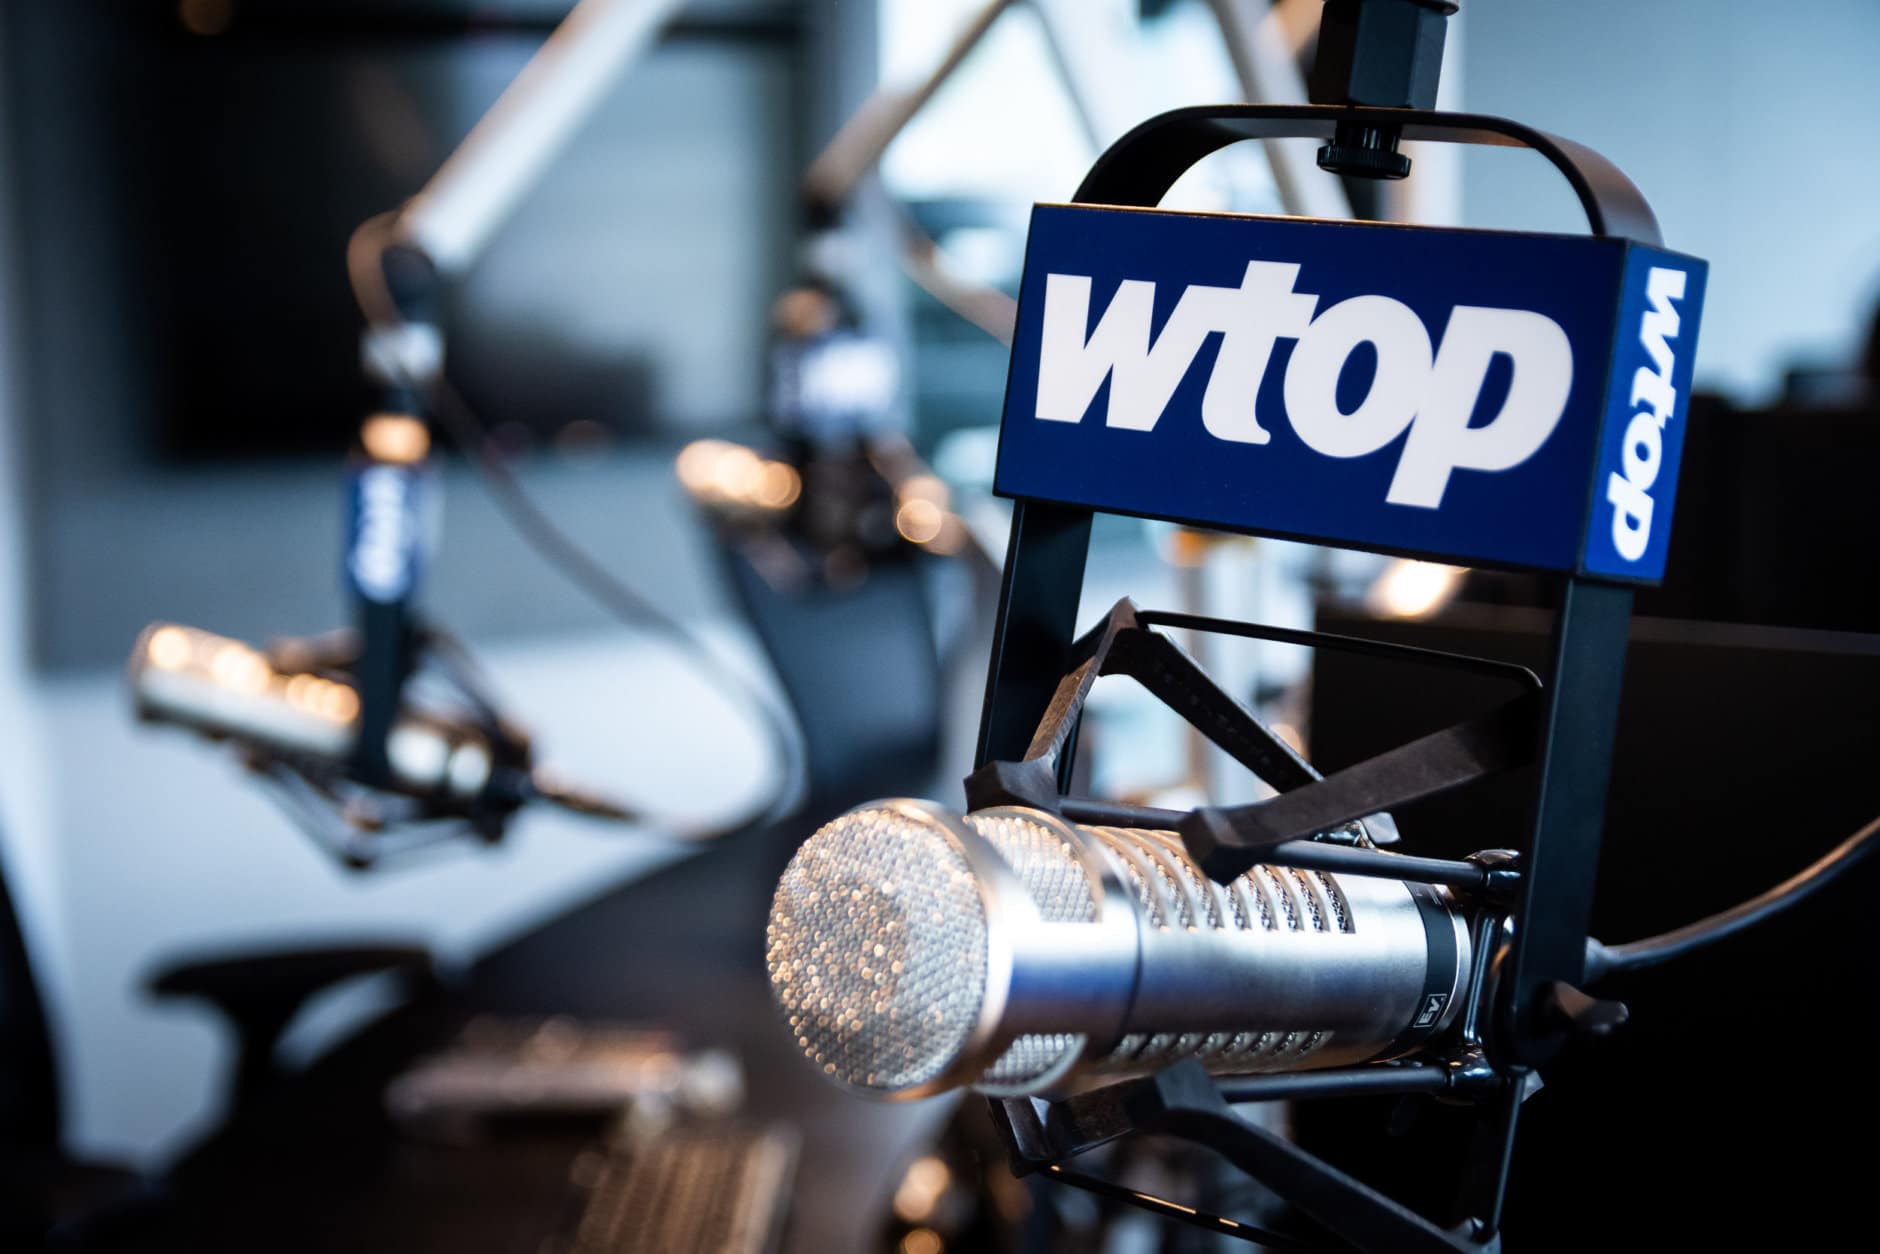 Starting in early February, WTOP's live anchoring will be produced from six microphones like this one in the new Glass-Enclosed Nerve Center. The vast majority of 5425 Wisconsin Ave.'s technology is brand-new, under construction by Minnesota-based broadcast engineering team RadioDNA since late summer of 2018. WTOP's signal strength won't be impacted by the move, since the station's transmitter will remain at nearby American University. (WTOP/Alejandro Alvarez)